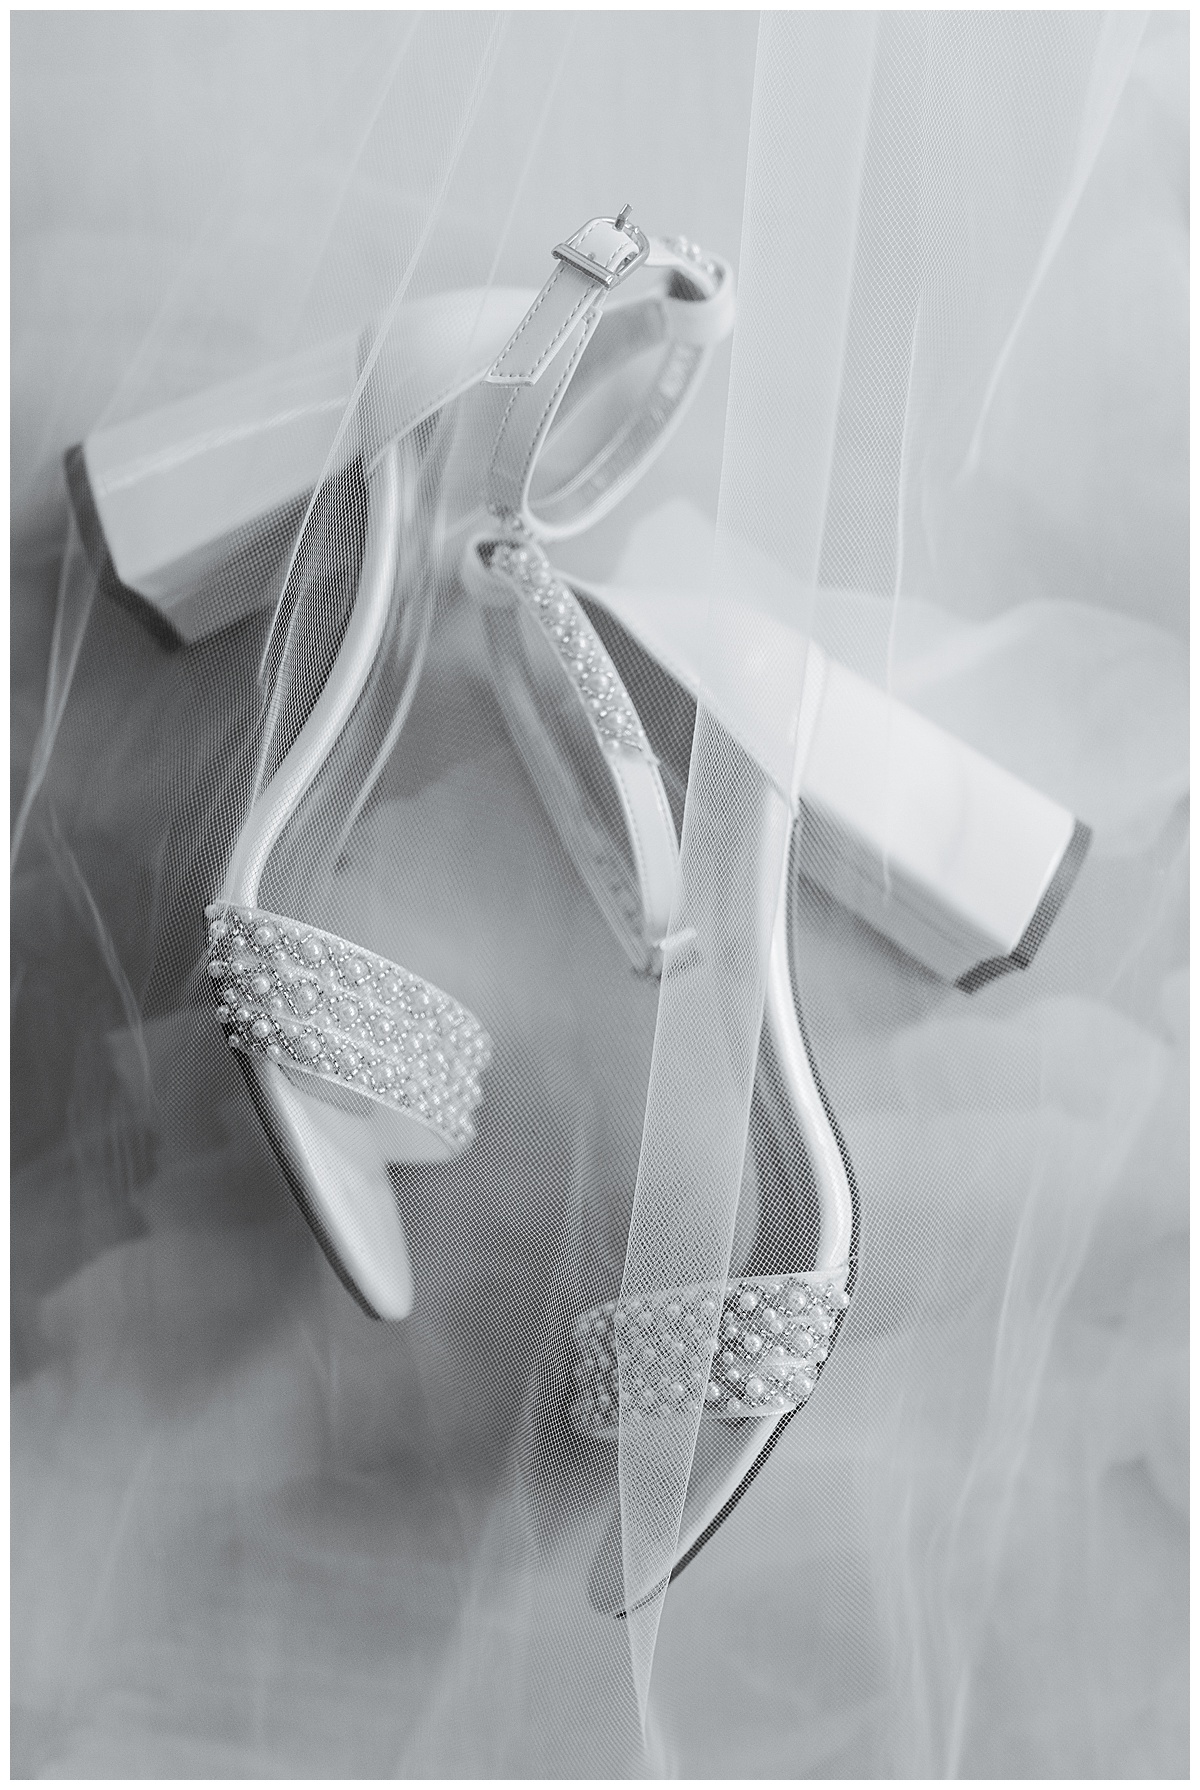 Bridal shoes and veil for Swish & Click Photography